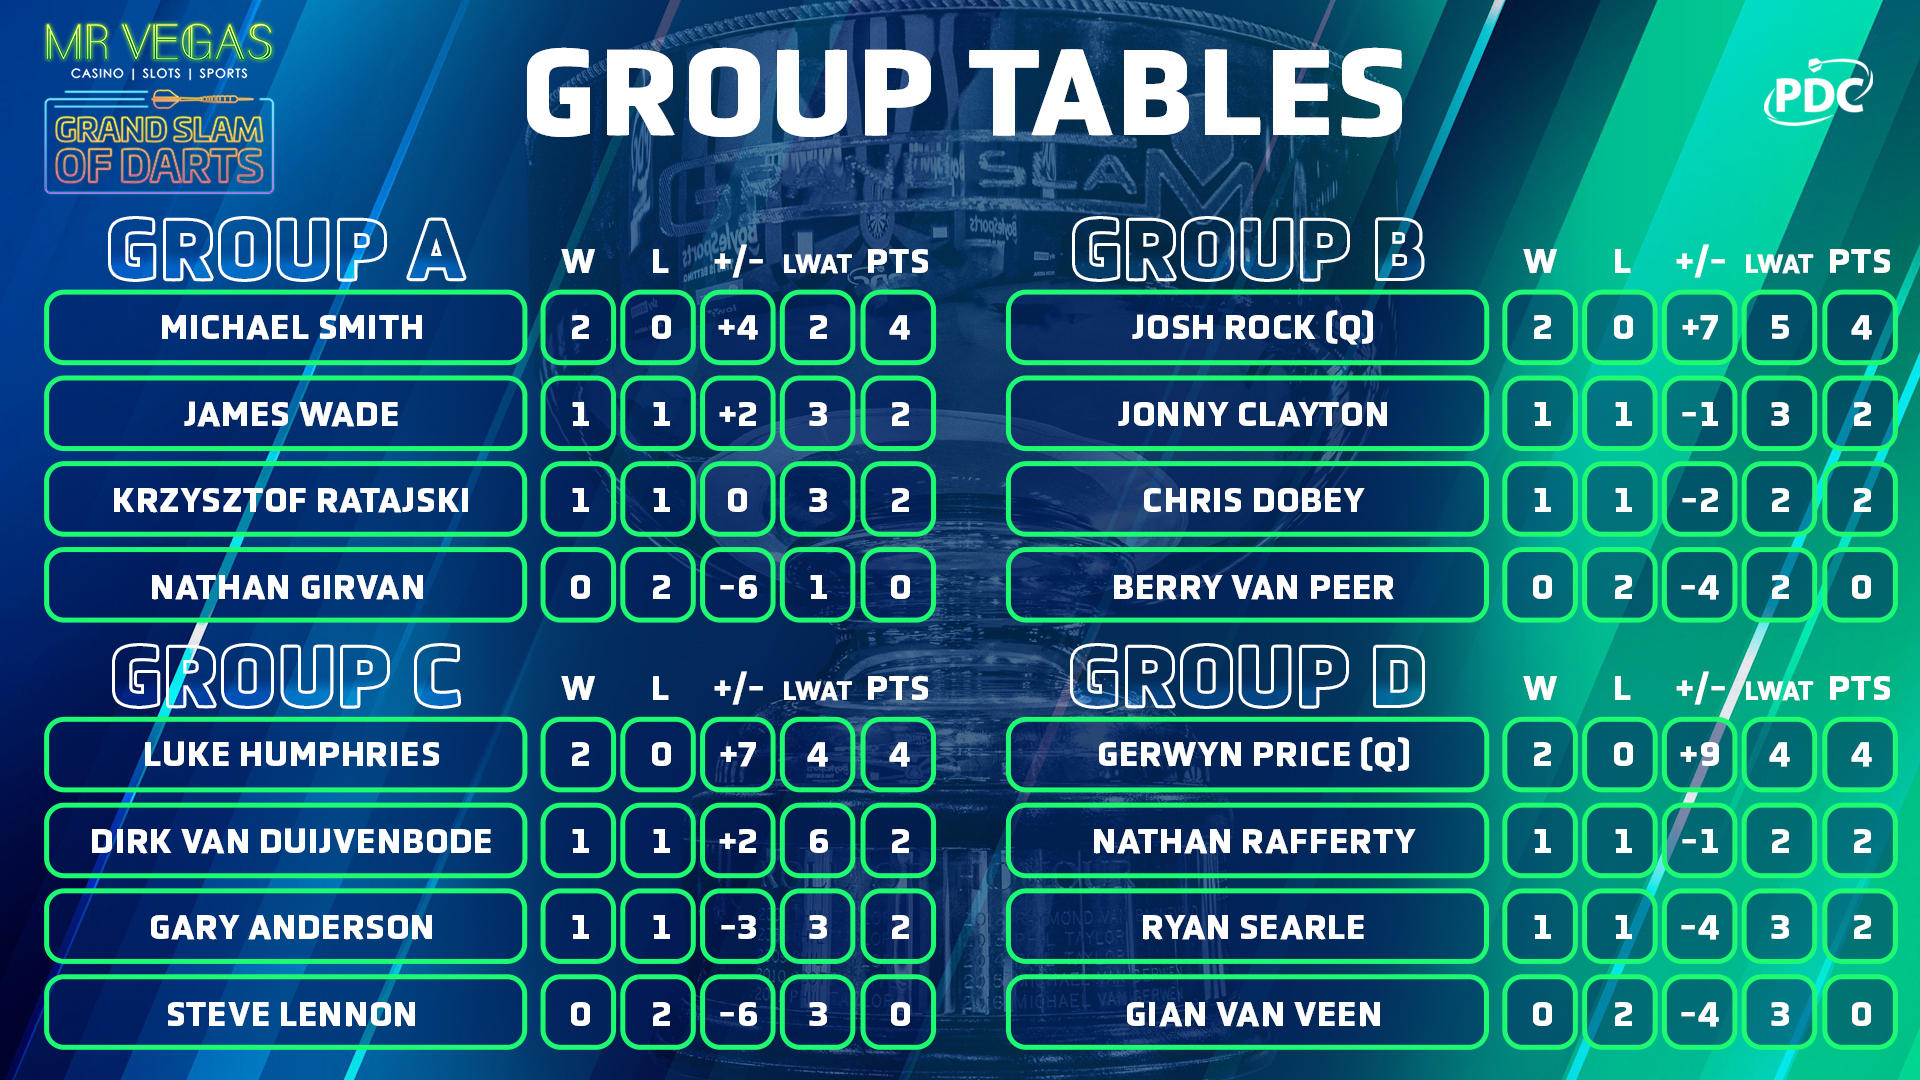 Groups A-D tables